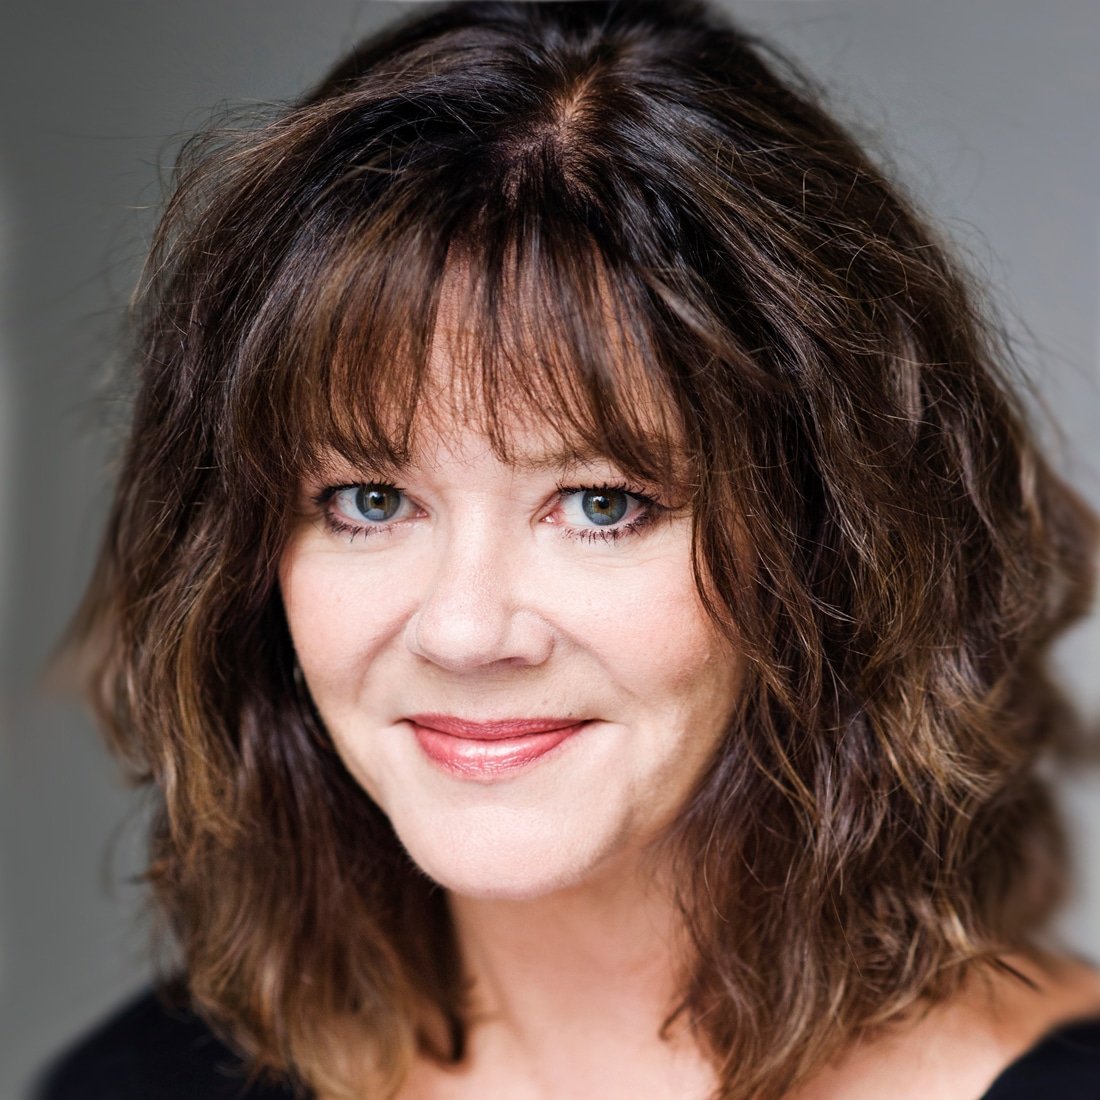 Josie-Lawrence-Actor-Comedian-Host-Entertainer-at-Great-British-Speakers